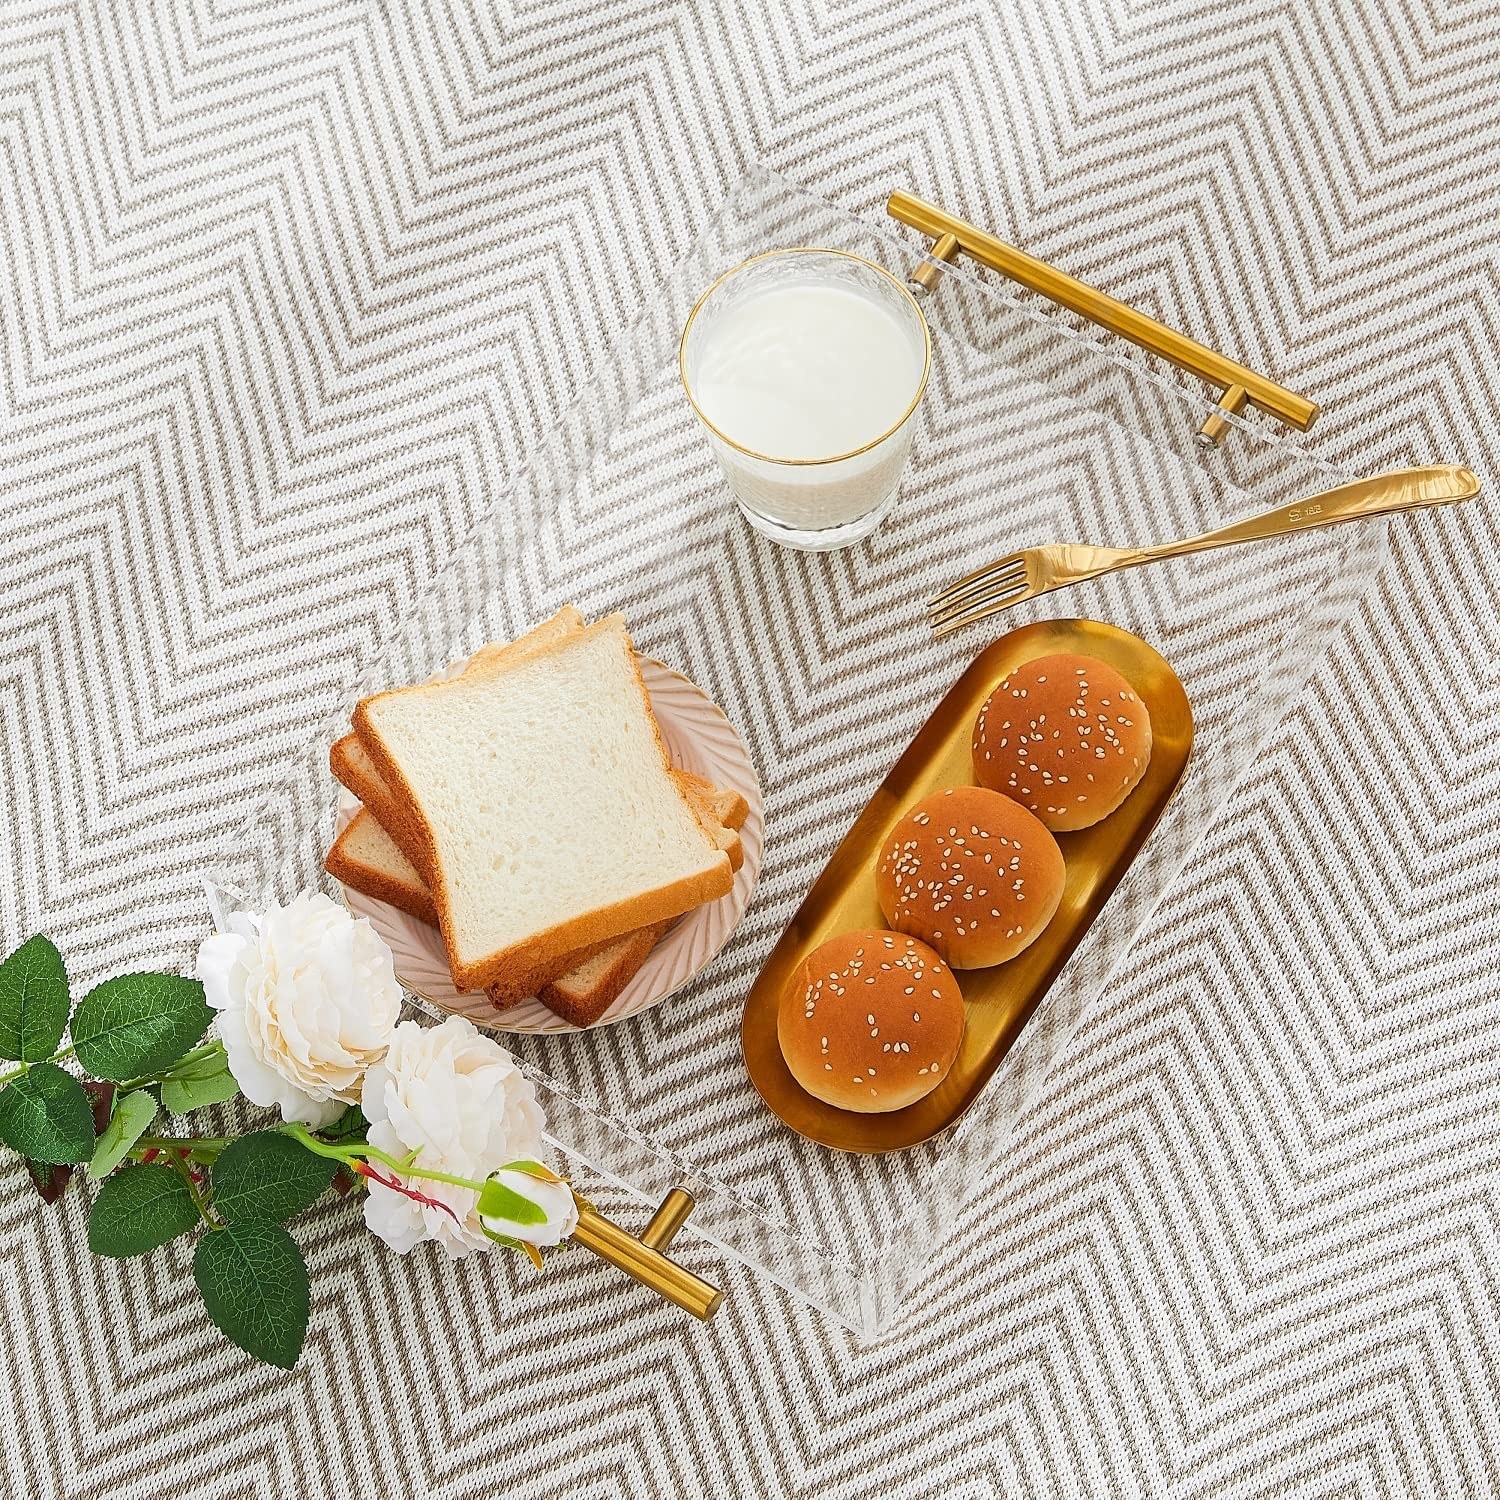 The tray on a chevron carpet with bread, buns, and milk on it